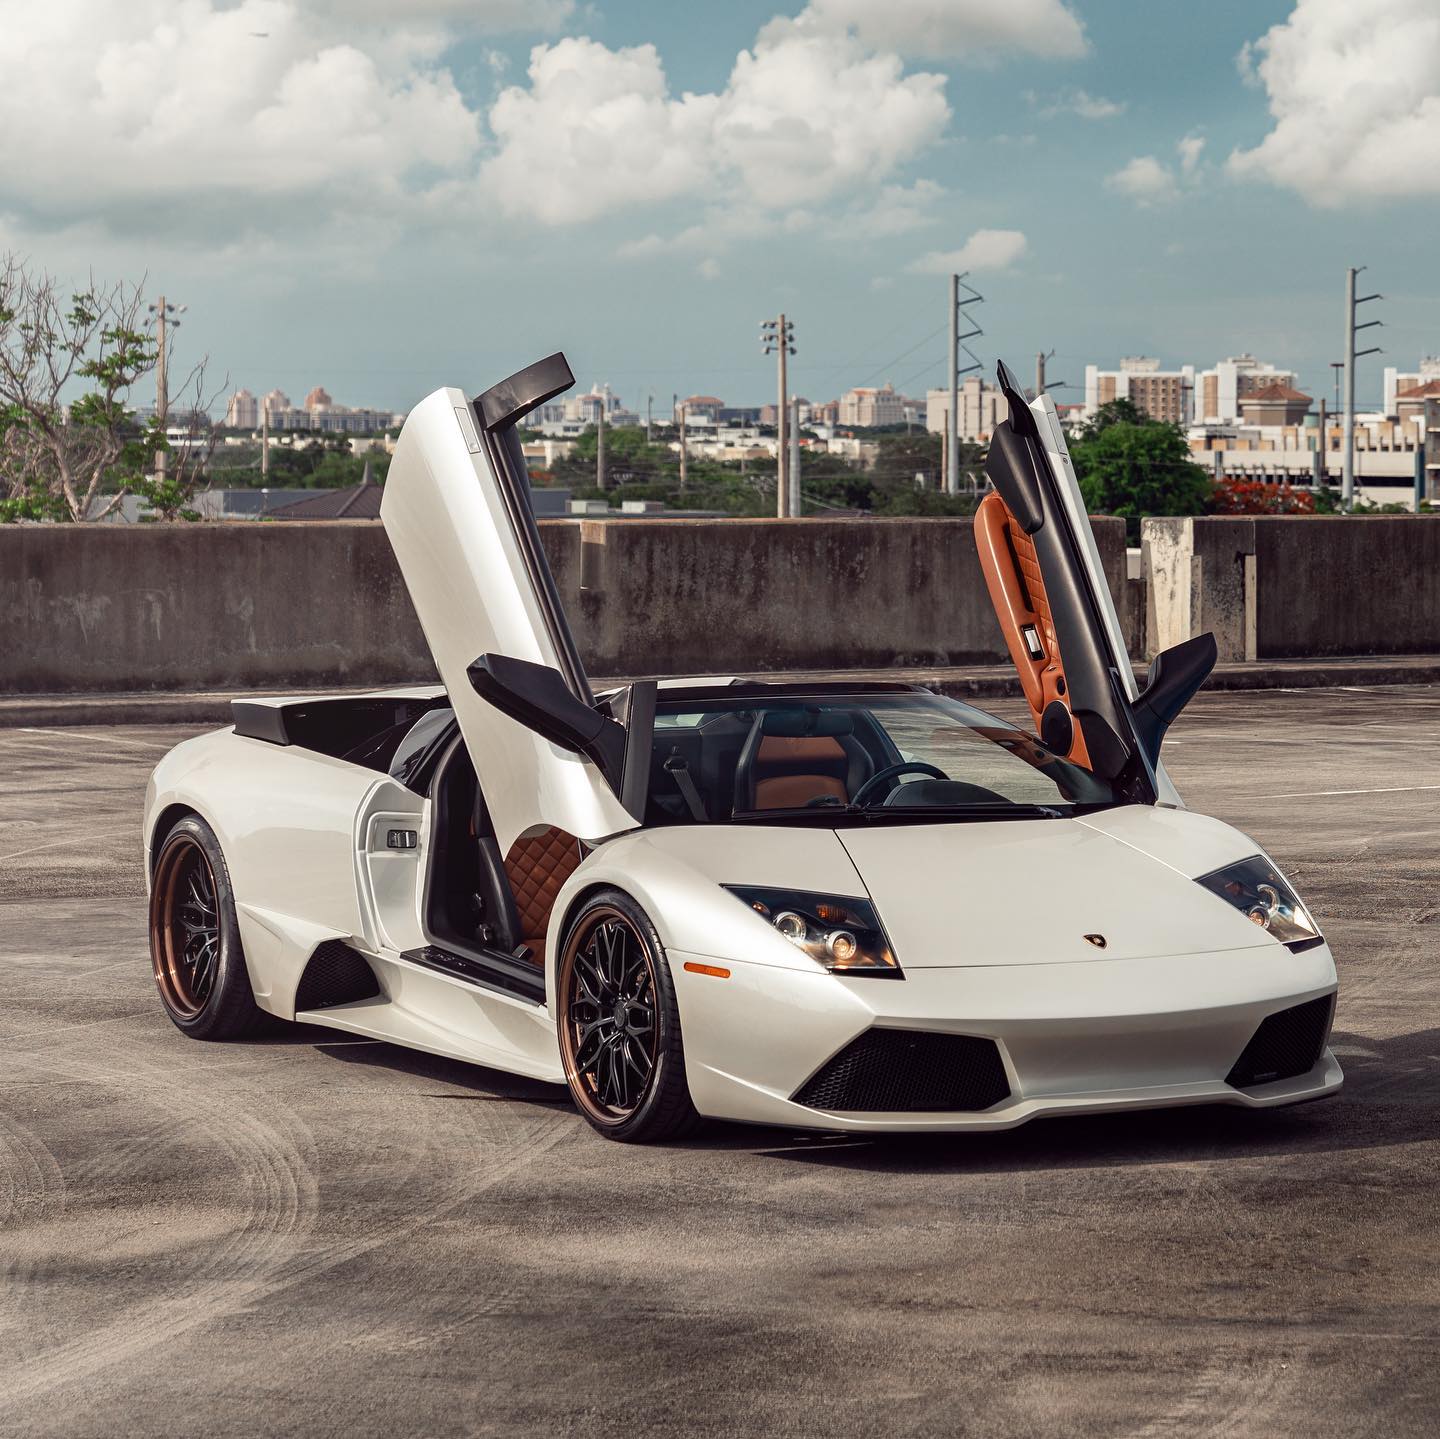 Looking Classy yet Modern, This Satin White Lambo Murci Roadster Is,  Indeed, Gated - autoevolution